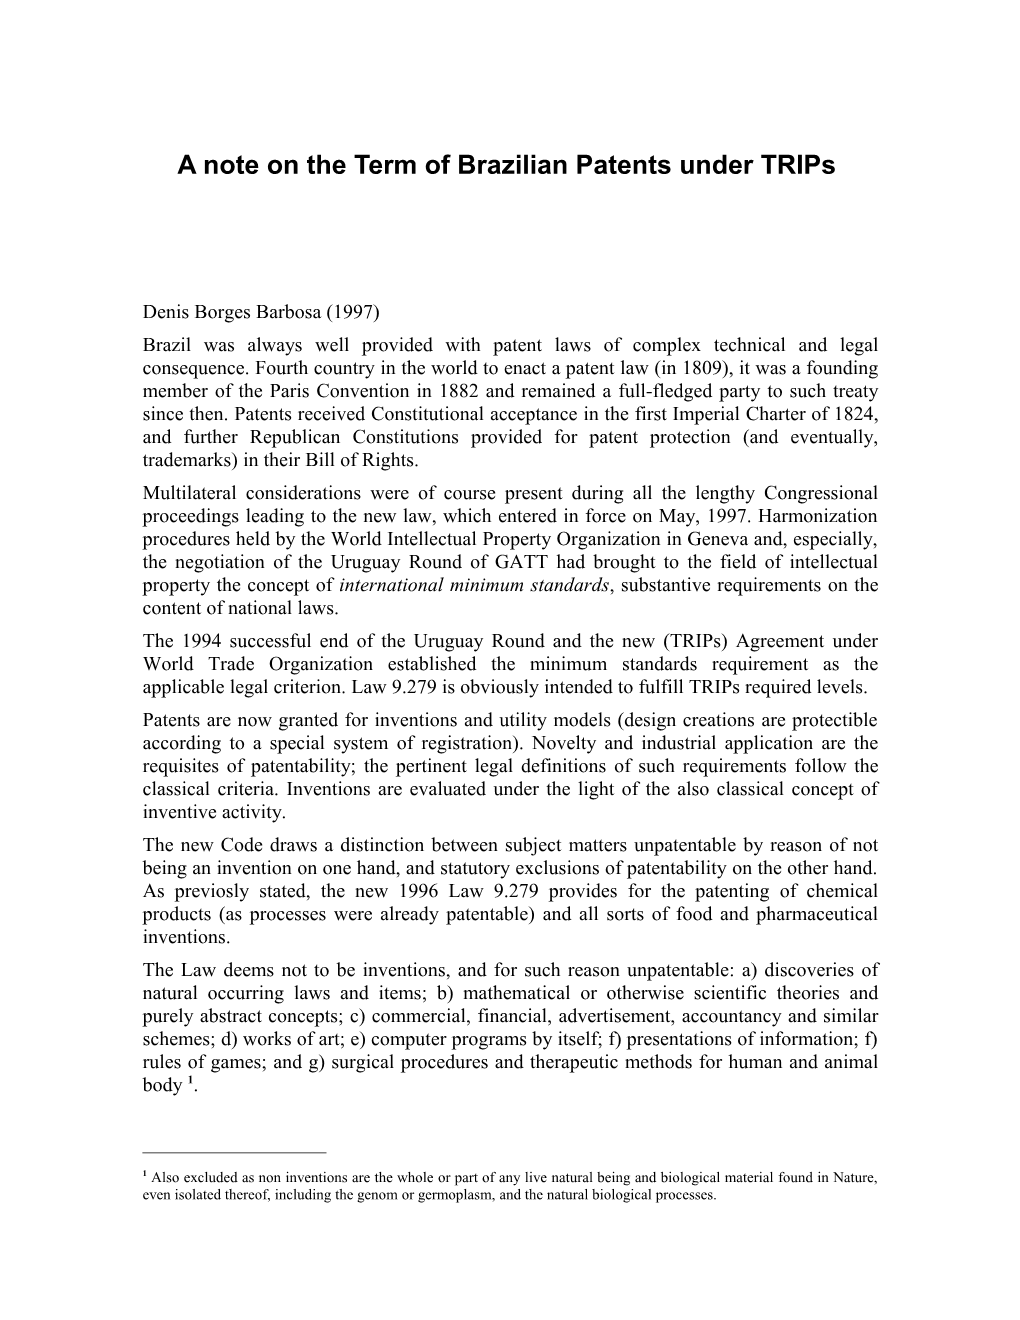 A Note on the Term of Brazilian Patents Under Trips